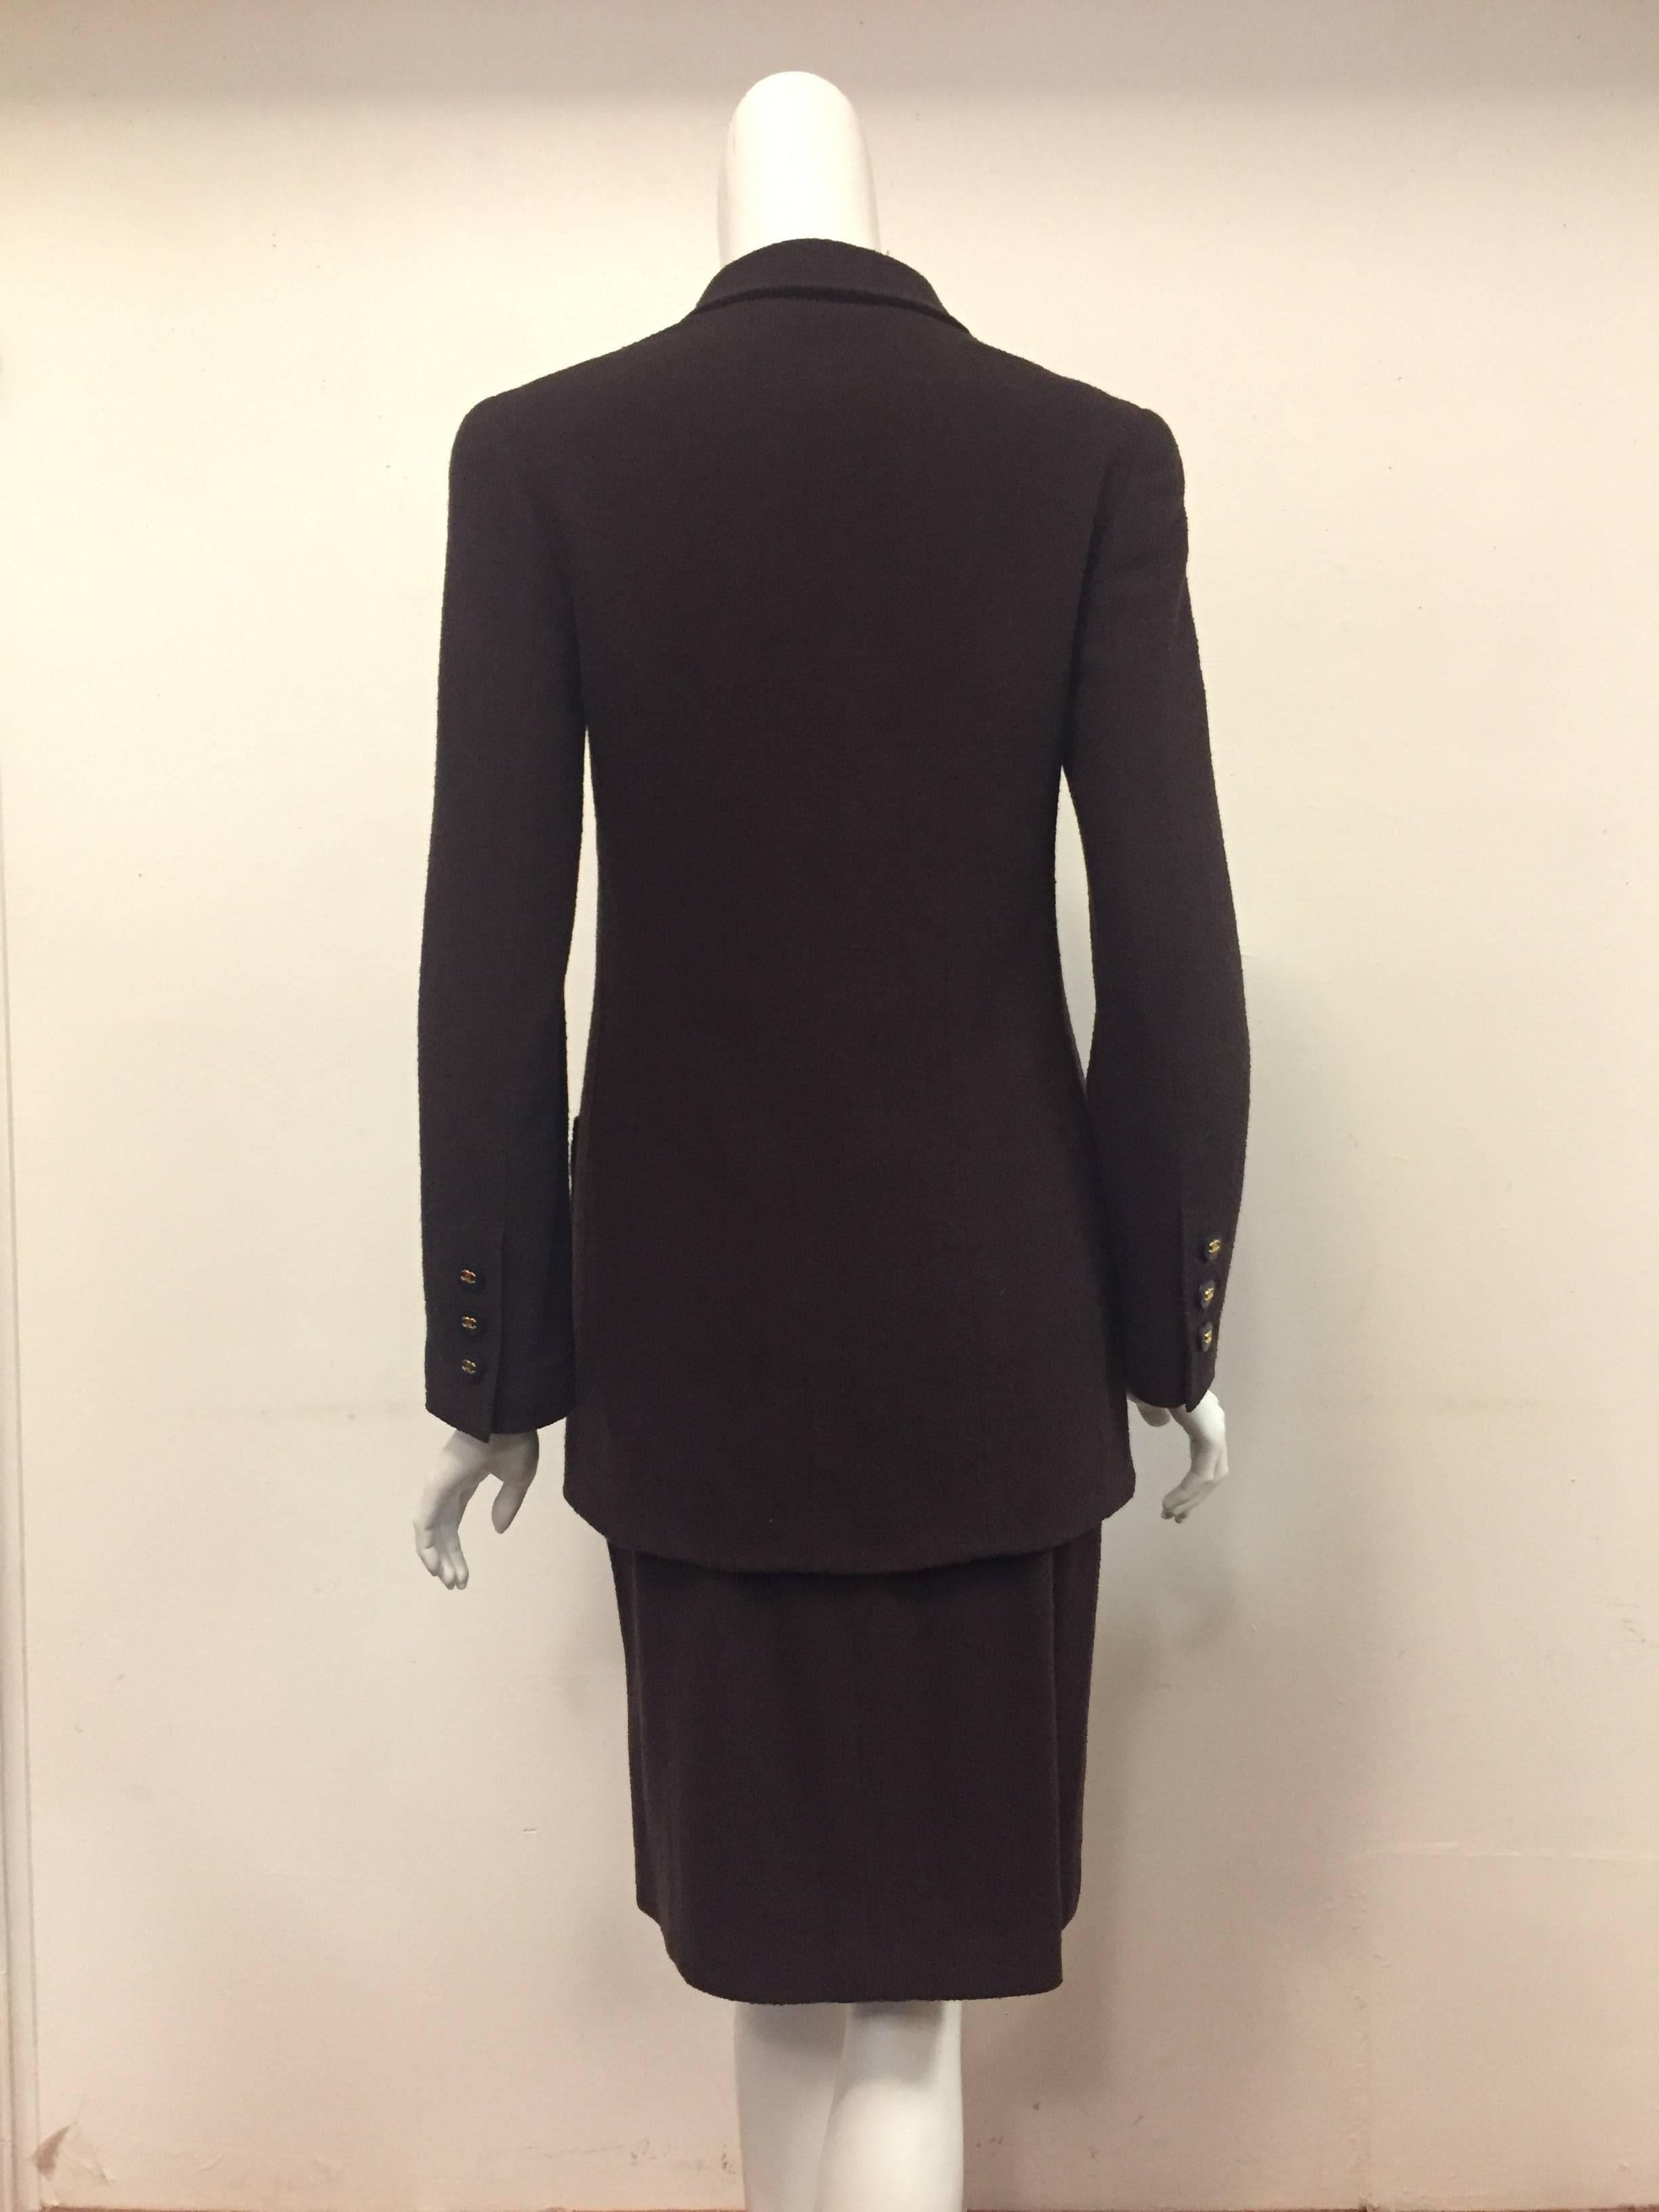 Black Chanel Boutique Chocolate Wool Blend Skirt Suit with Longer Length Jacket